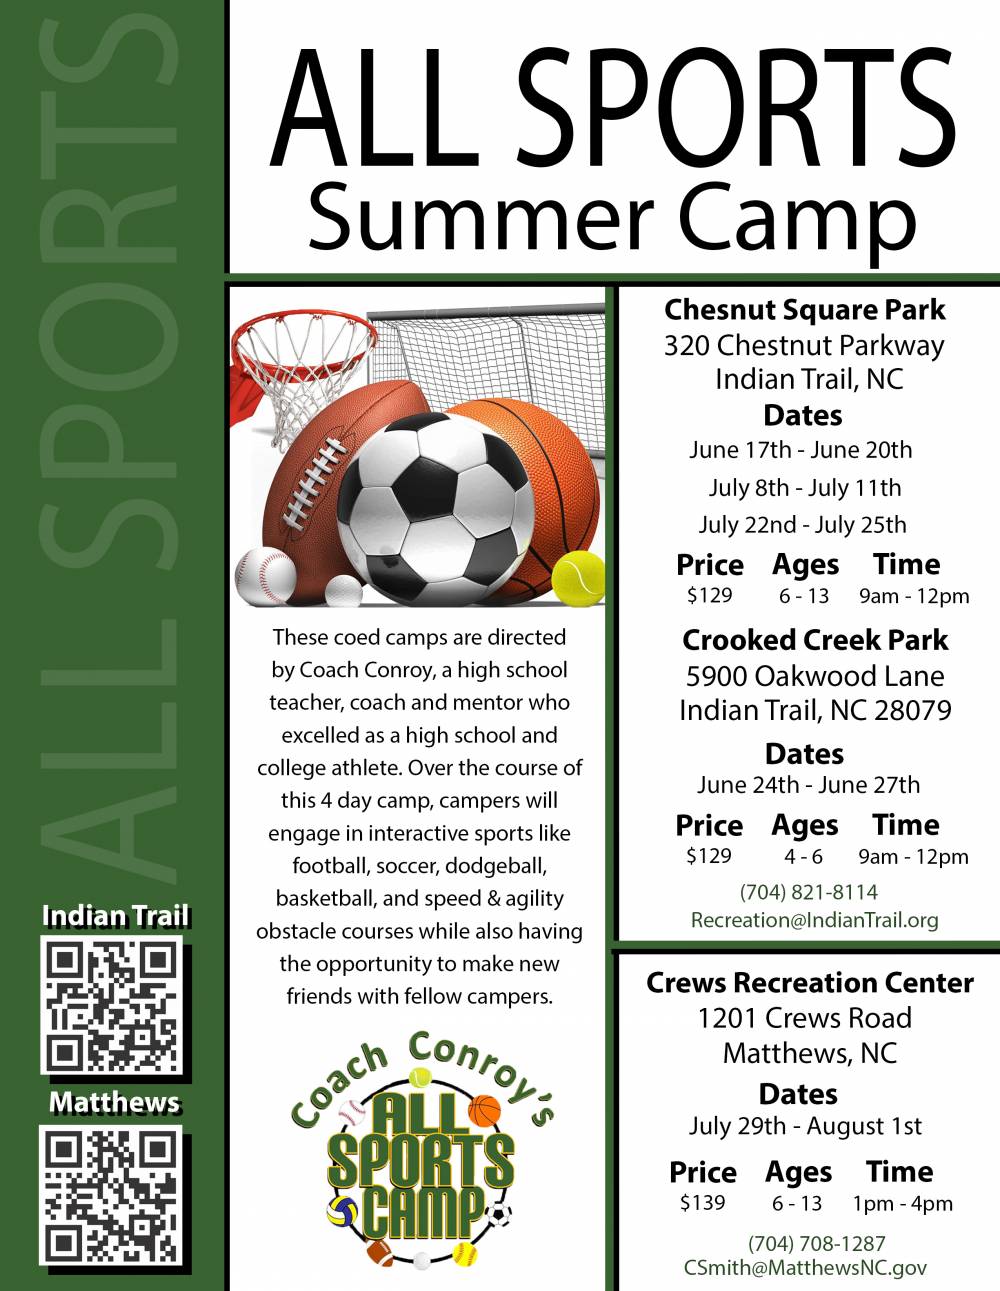 TOP NORTH CAROLINA SUMMER CAMP: Coach Conroy s All Sports Camp is a Top Summer Camp located in Indian Trail North Carolina offering many fun and enriching camp programs. 